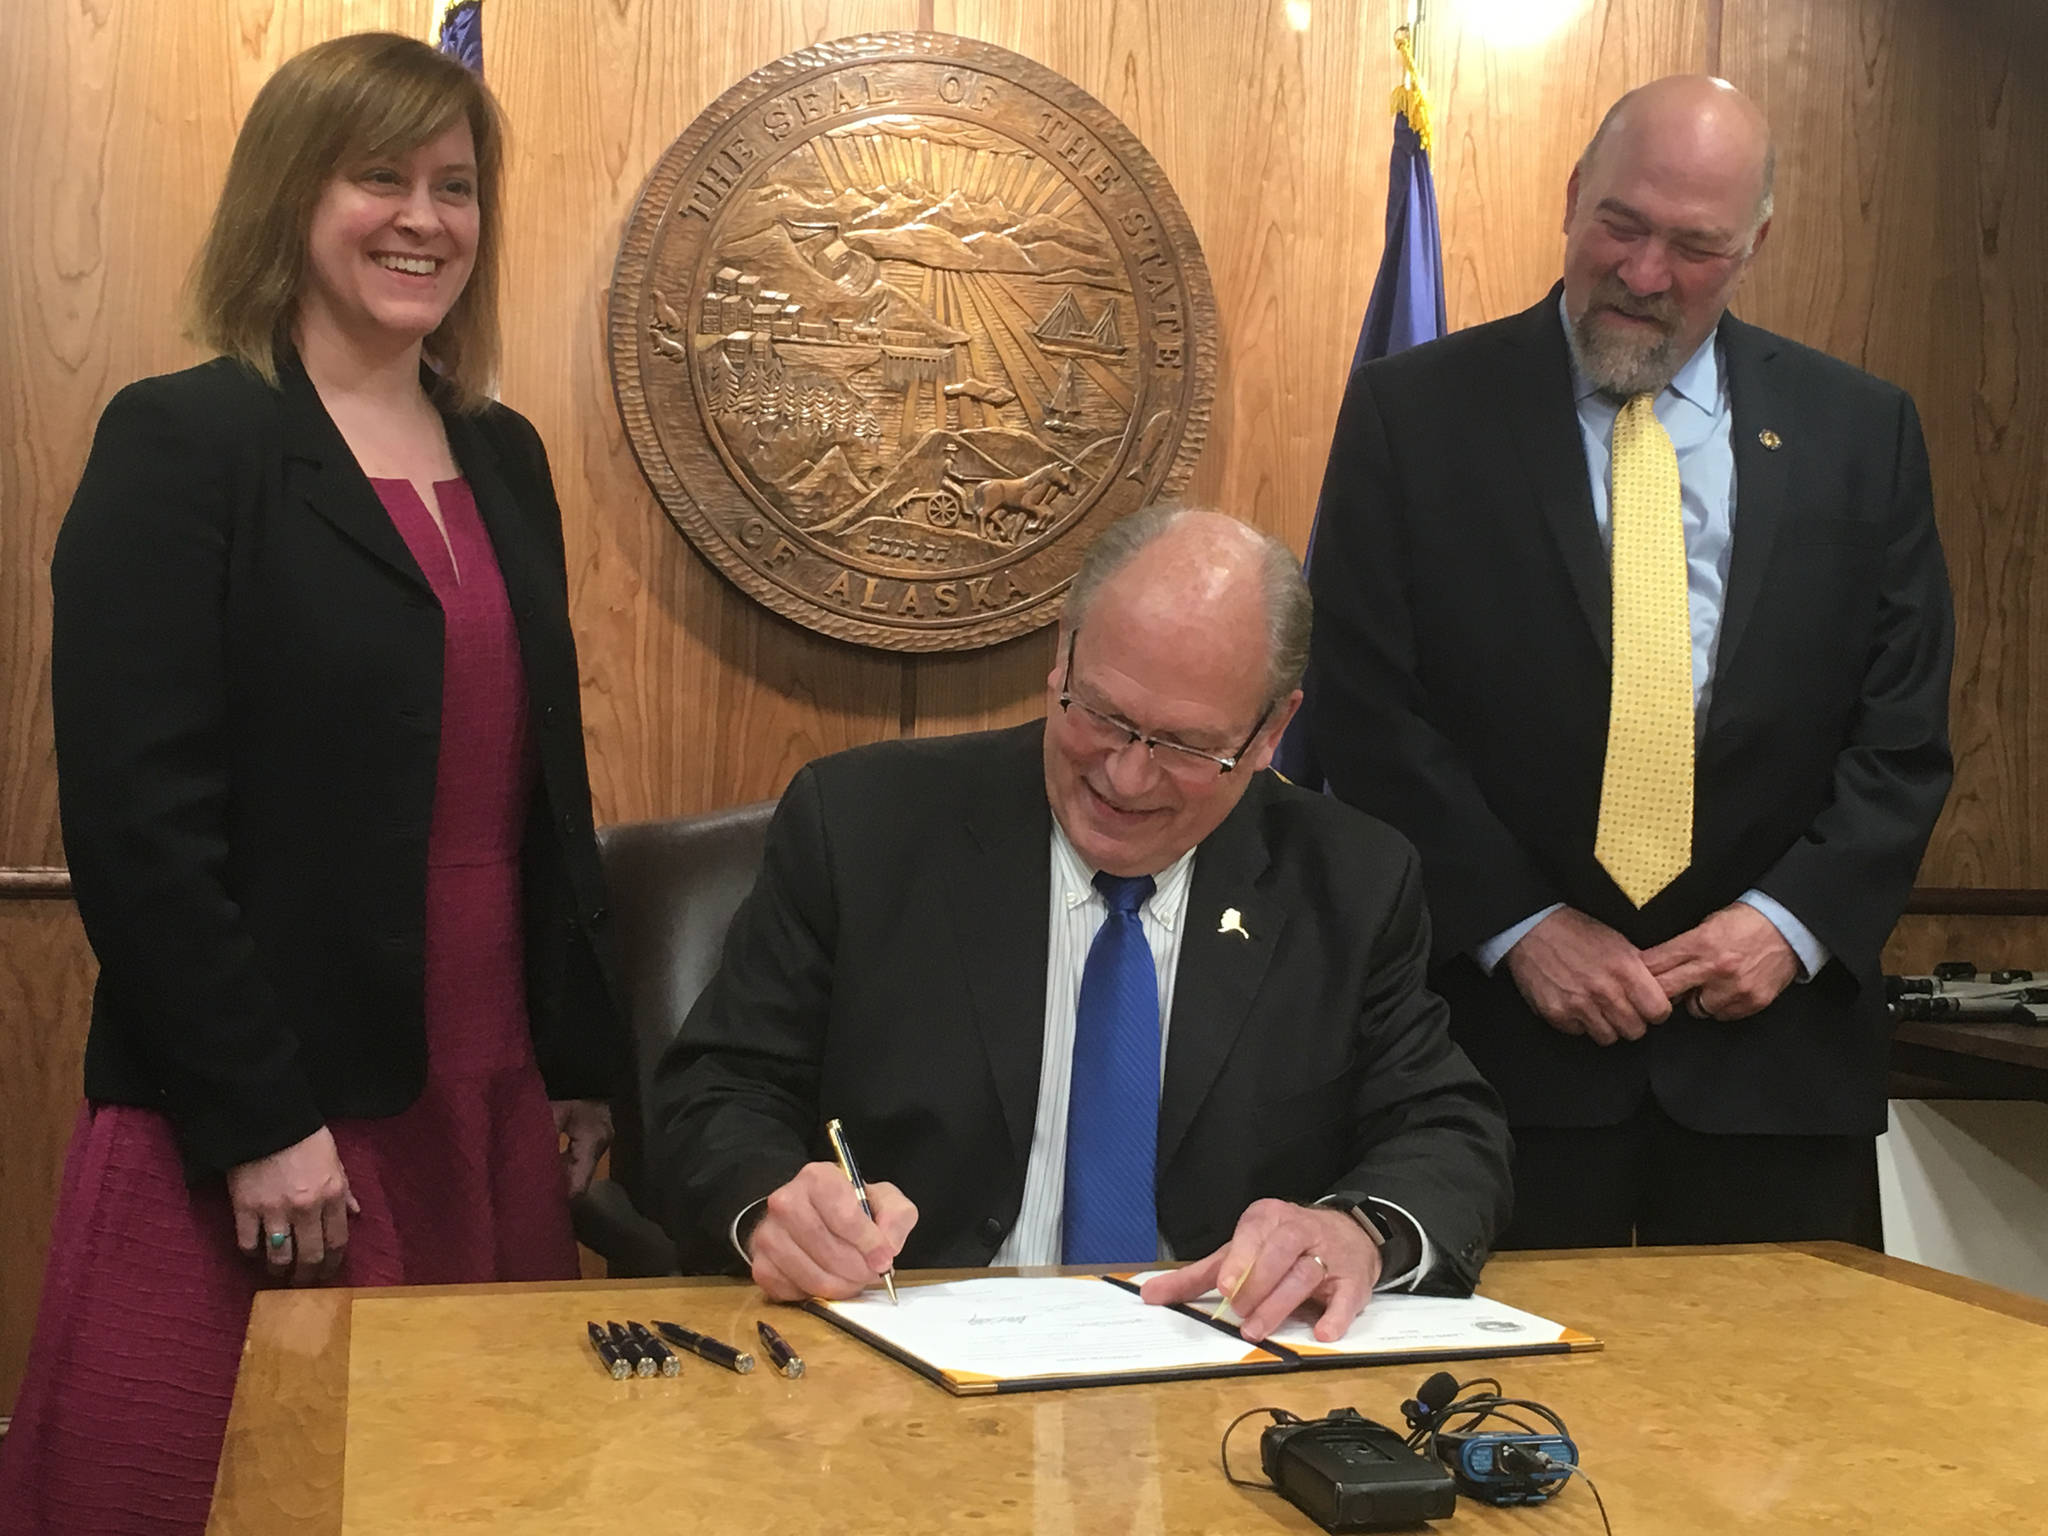 James Brooks | Juneau Empire Sen. Mia Costello, R-Anchorage, and Rep. Adam Wool, D-Fairbanks, smile as Gov. Bill Walker signs House Bill 132, which allows ride-sharing companies to operate in Alaska, on Thursday in the Capitol.